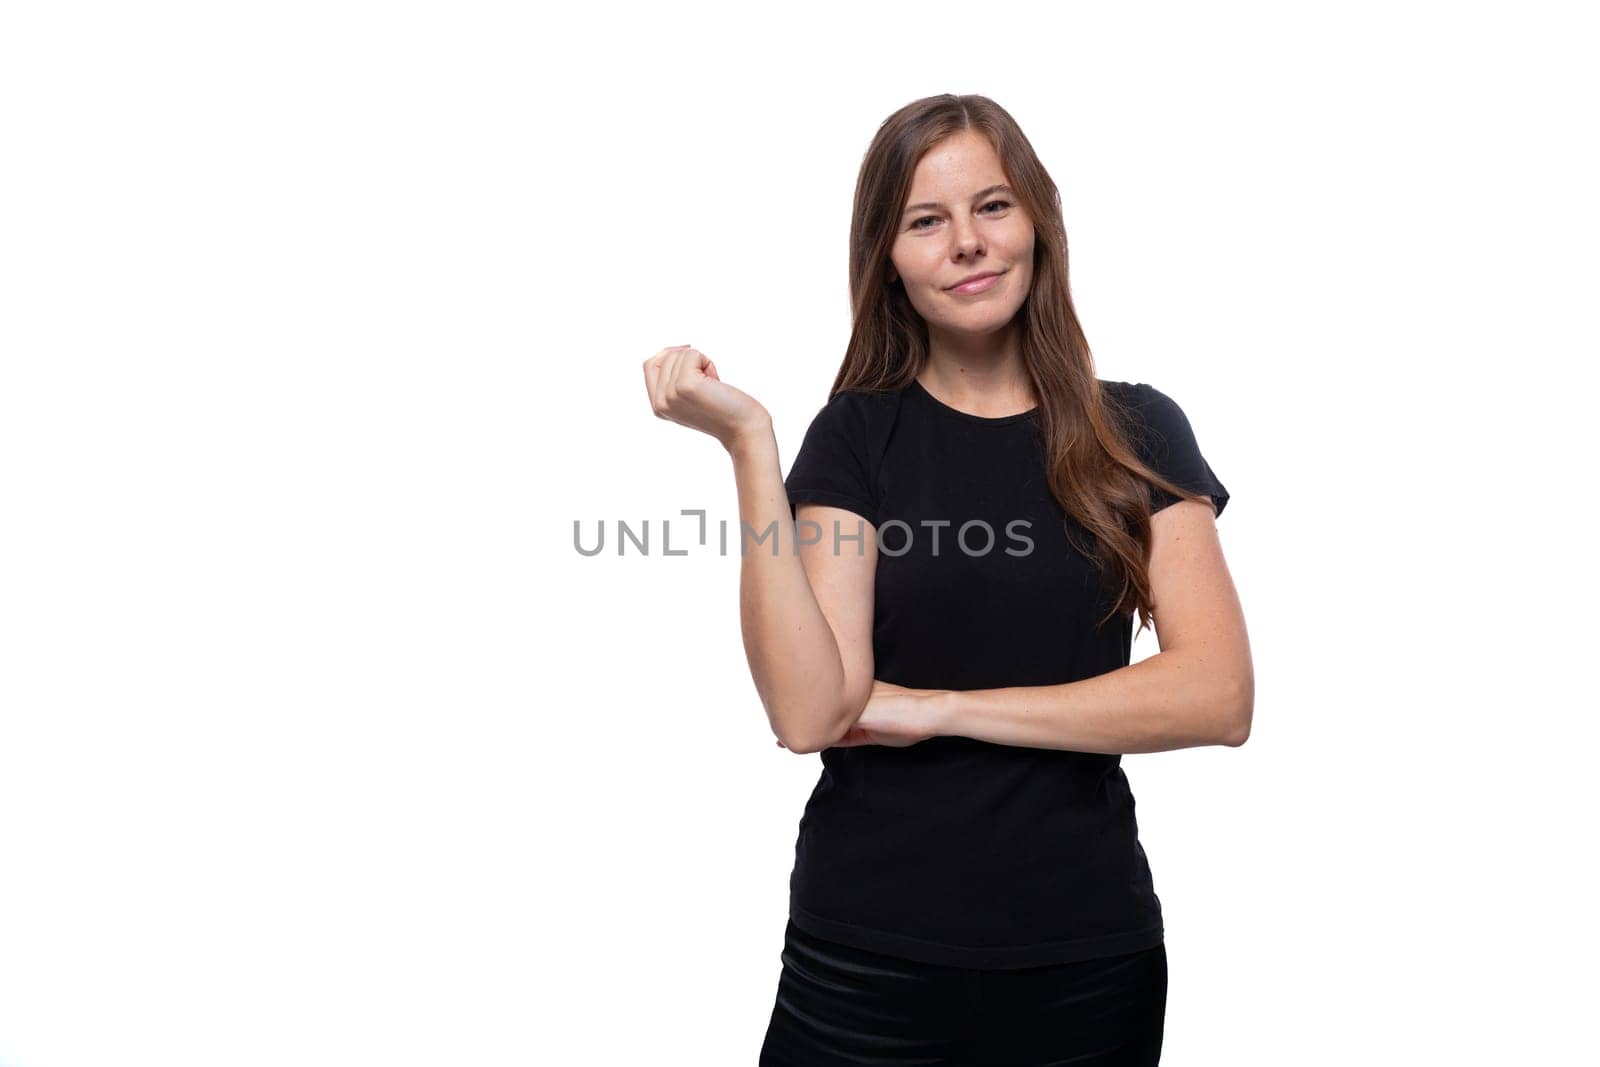 Dreamy young woman with straight hair wearing a black T-shirt on a white background.